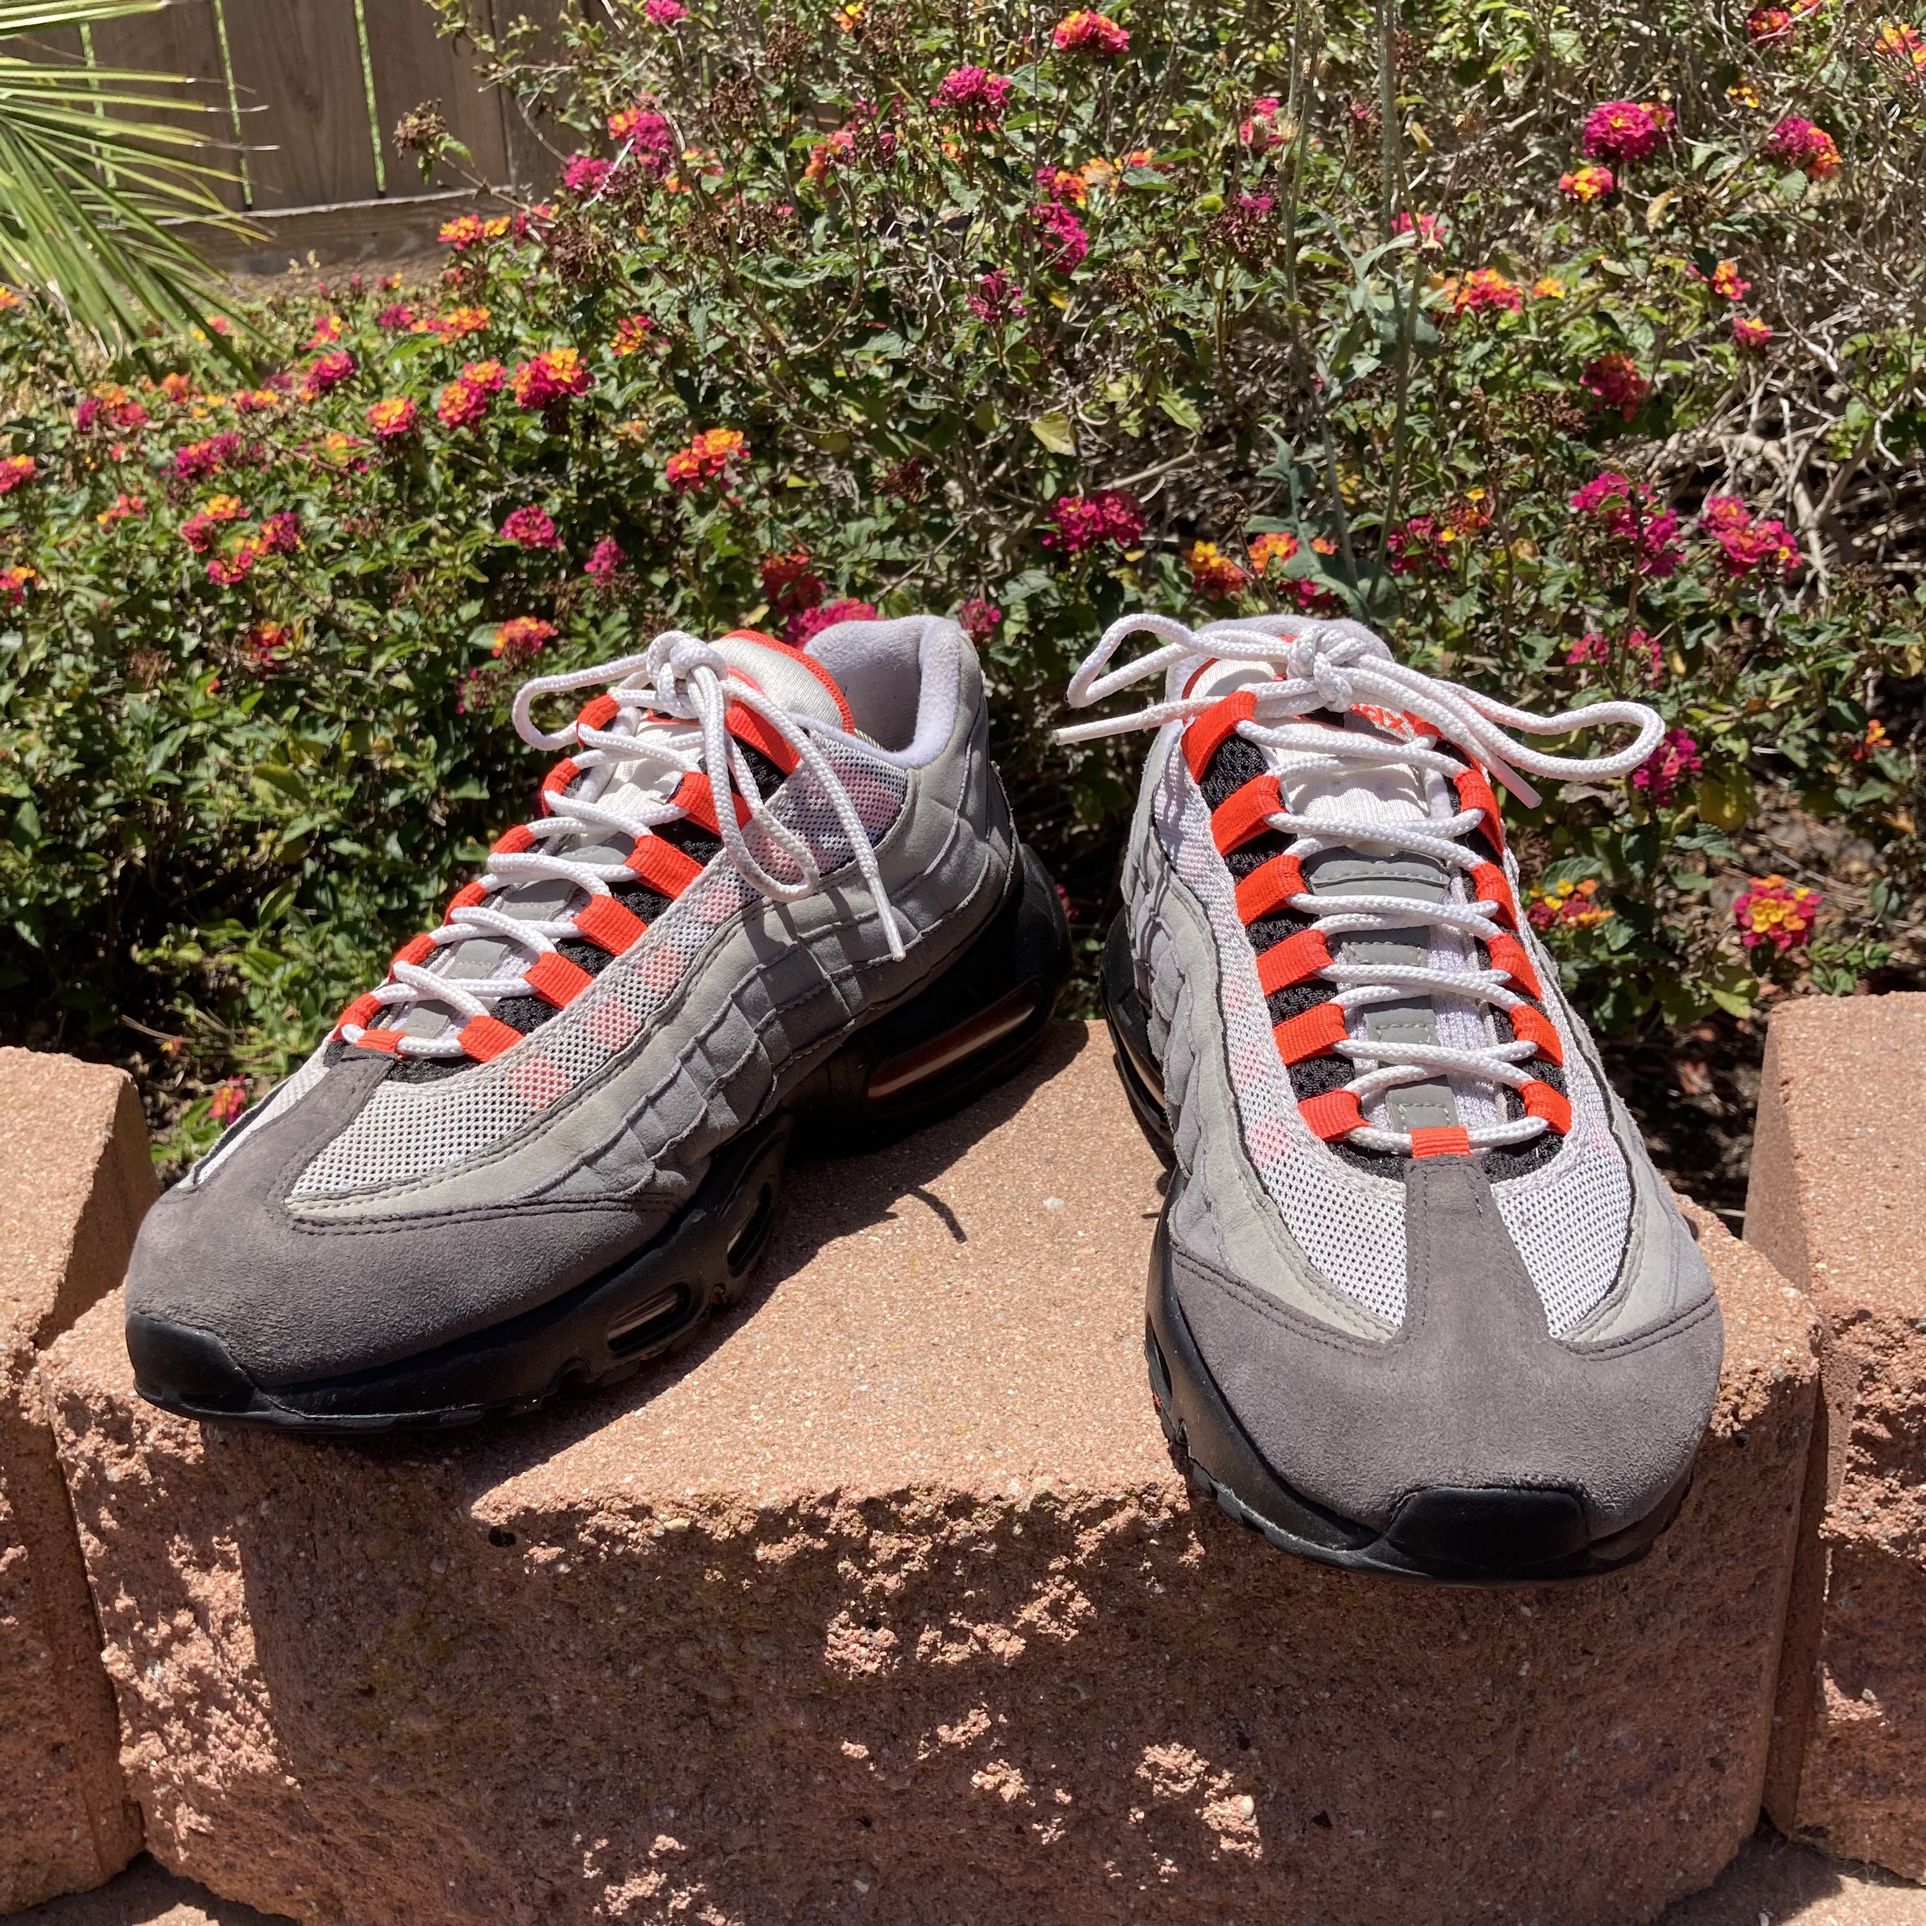 Nike Air Max 95 OG Solar Red M for Sale in Chula Vista, - OfferUp